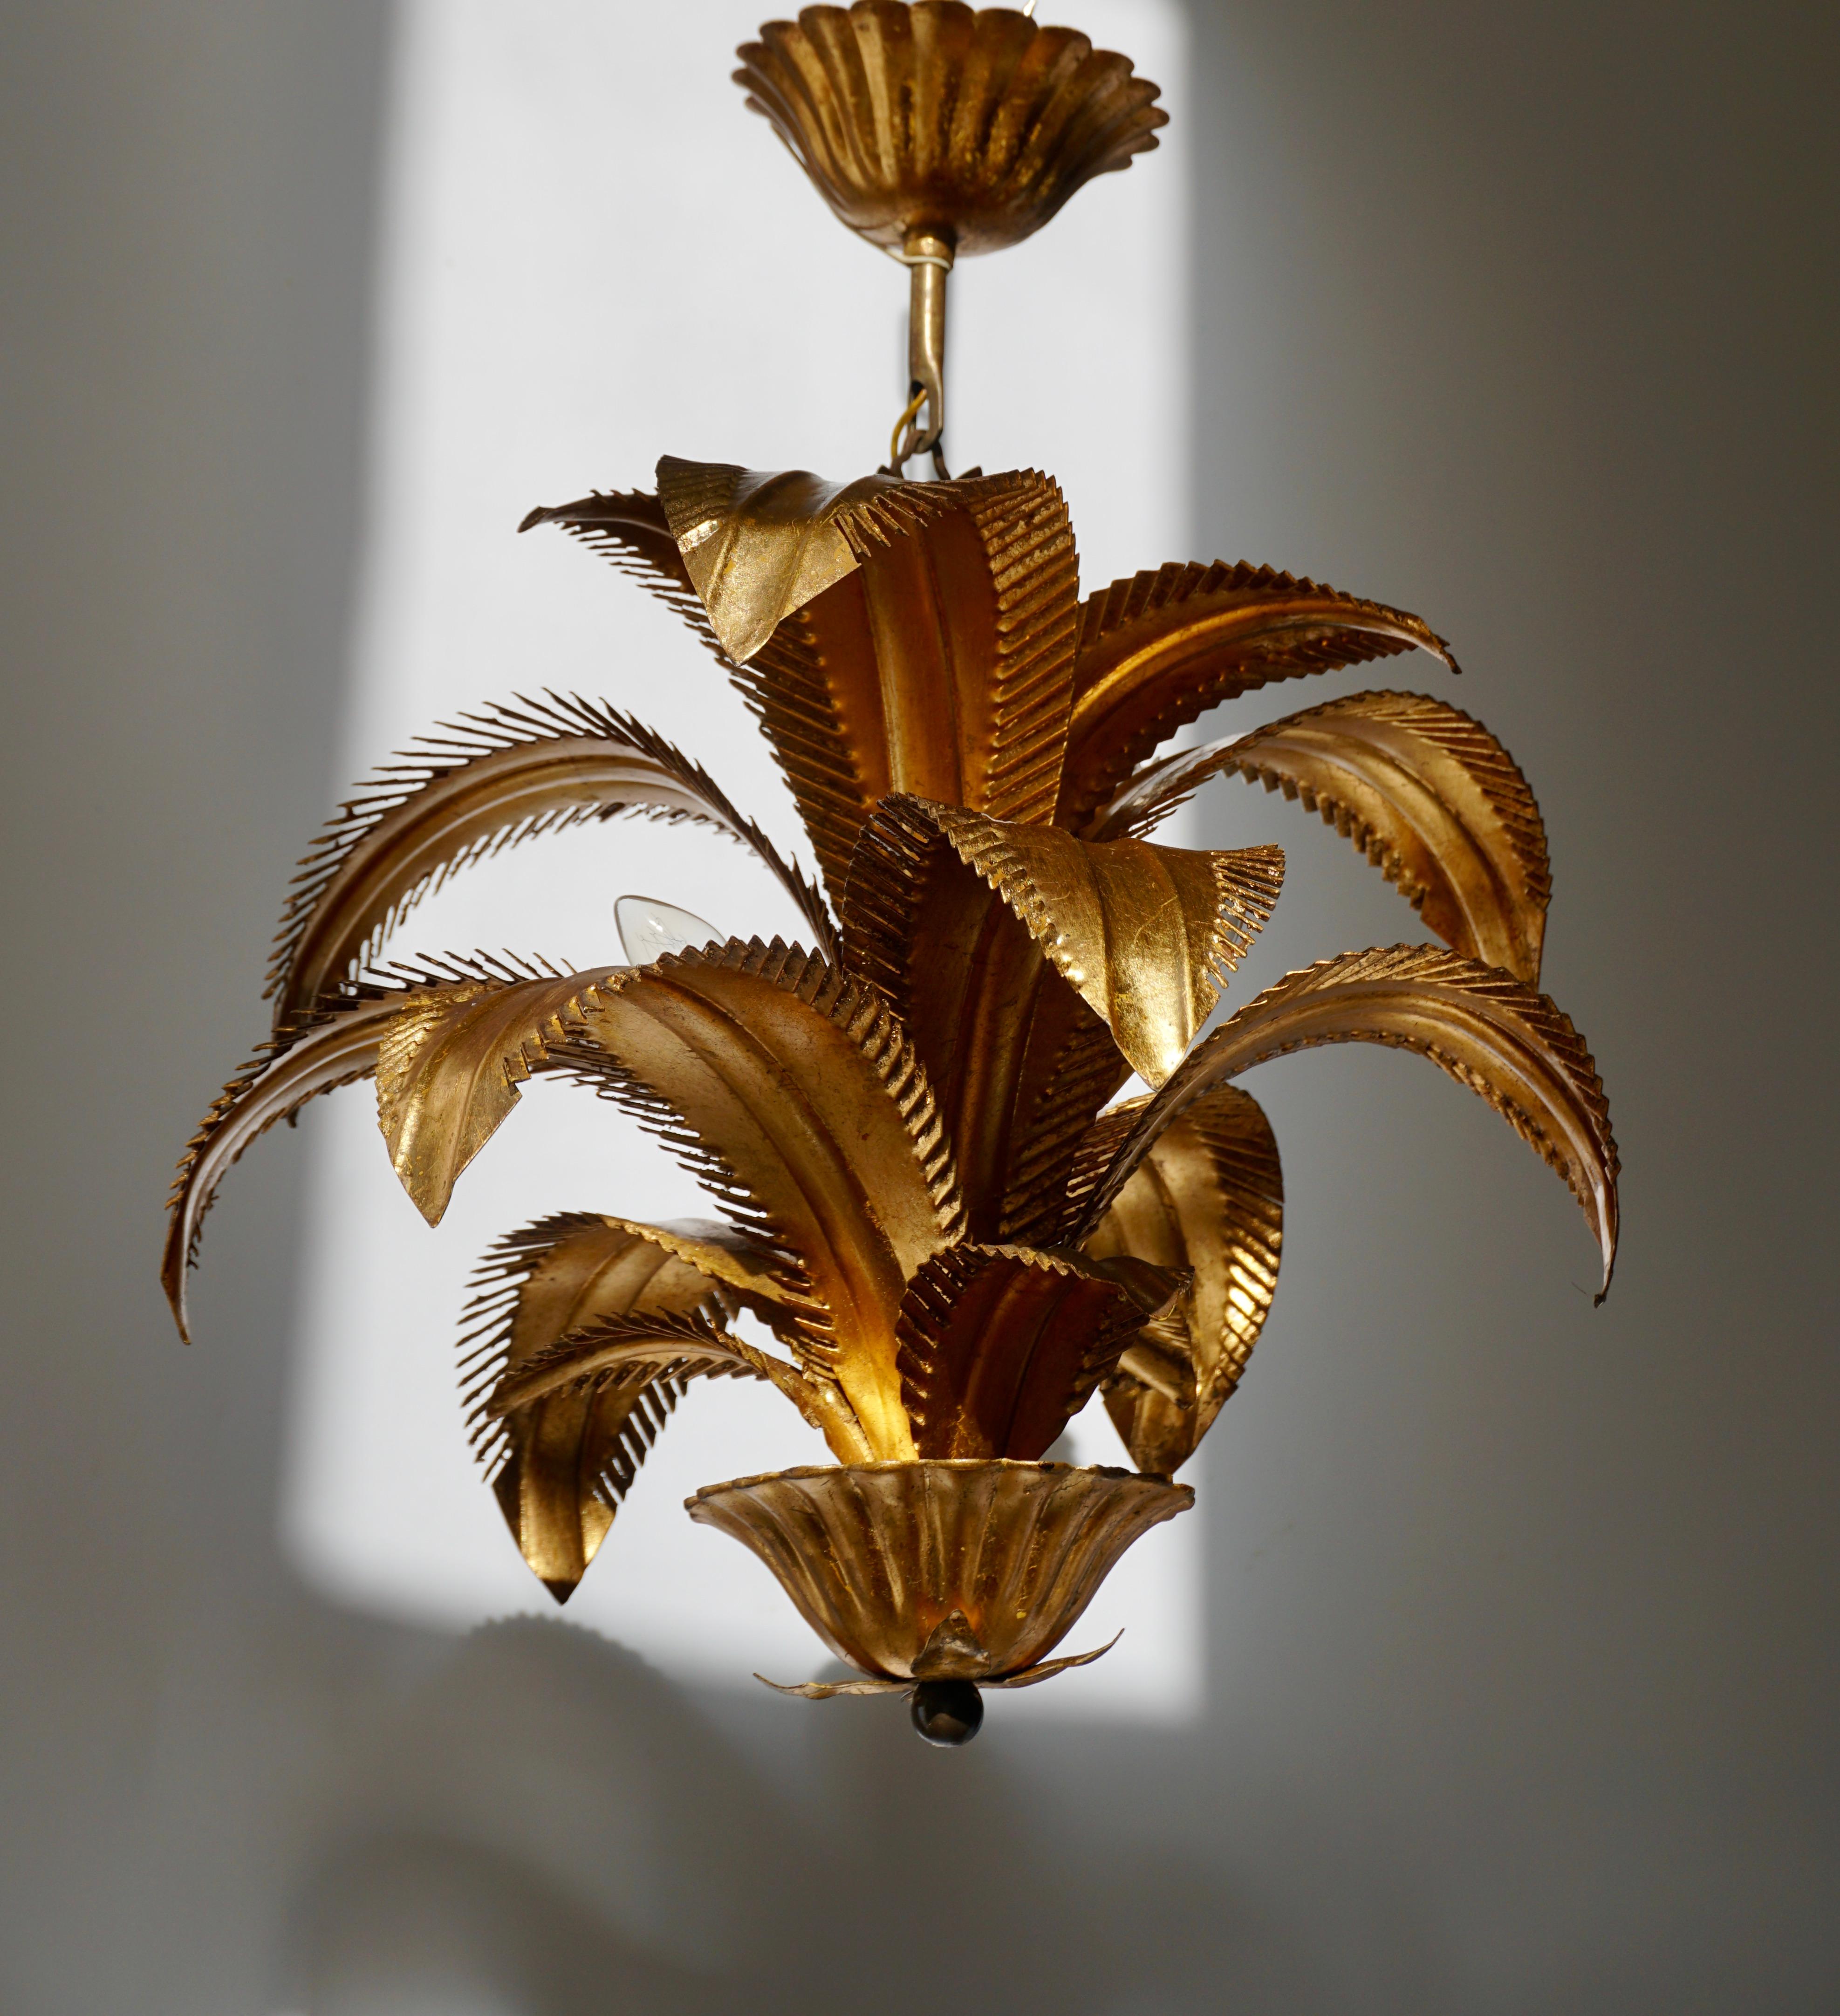 Gilt Meta palm leaf chandelier with three lights and ceiling canopy, circa mid-20th century. The piece is in full working condition.
Diameter 40 cm.
Height fixture 35 cm.
Total height including the chain and canopy 46 cm.
The light requires